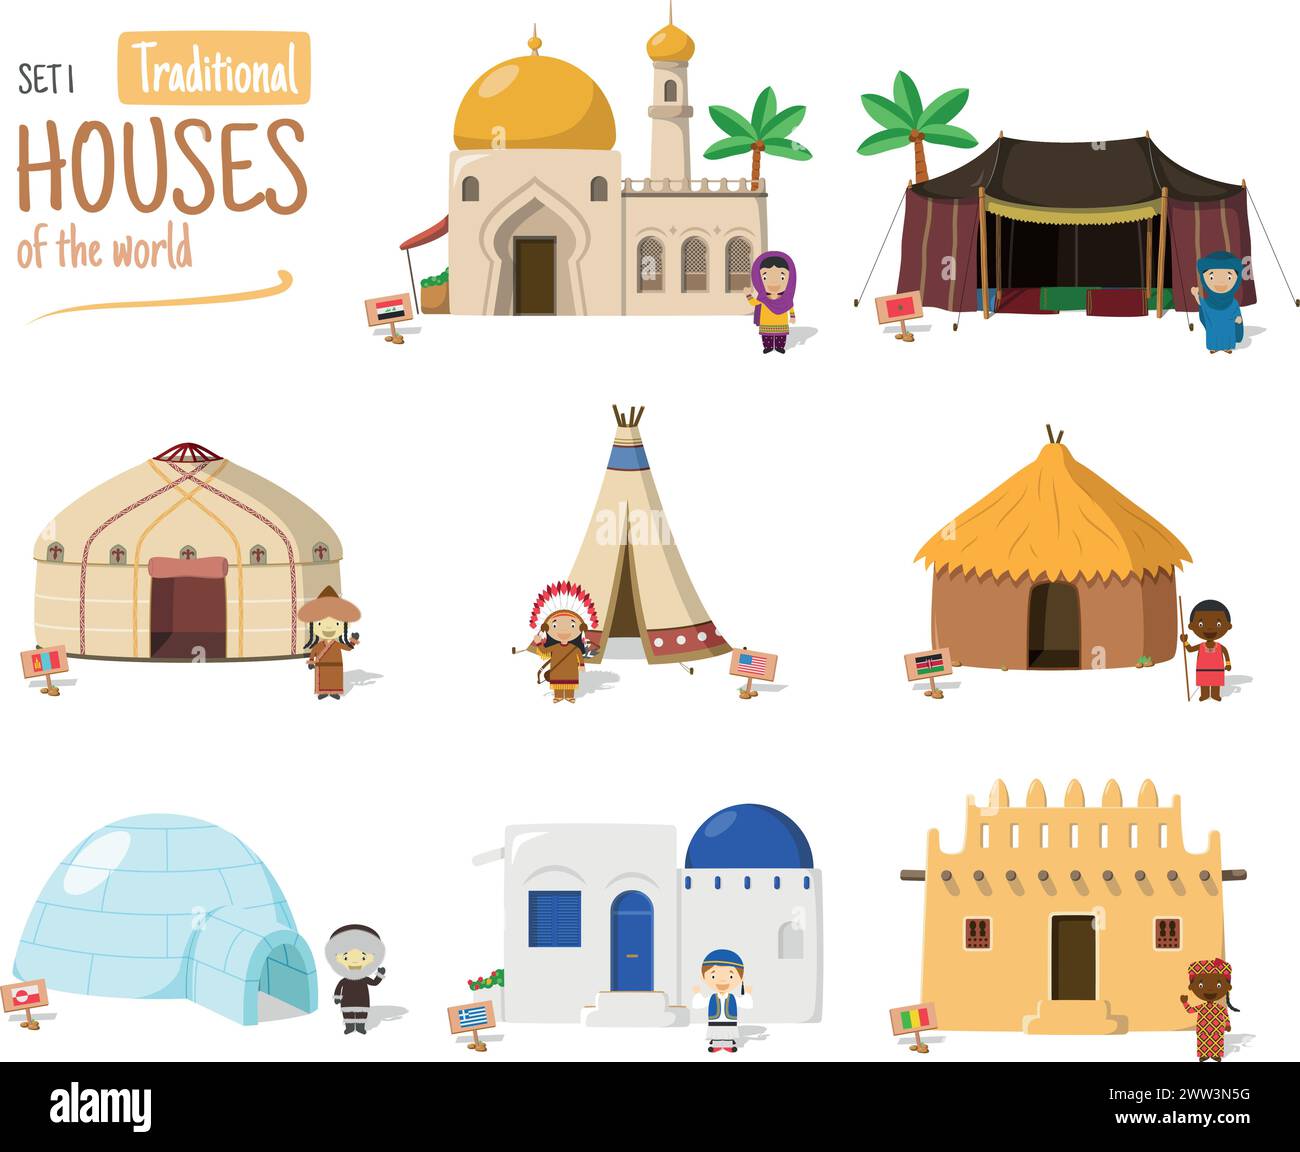 Vector illustration Set 1 of Traditional Houses of the World in cartoon style isolated on white background Stock Vector